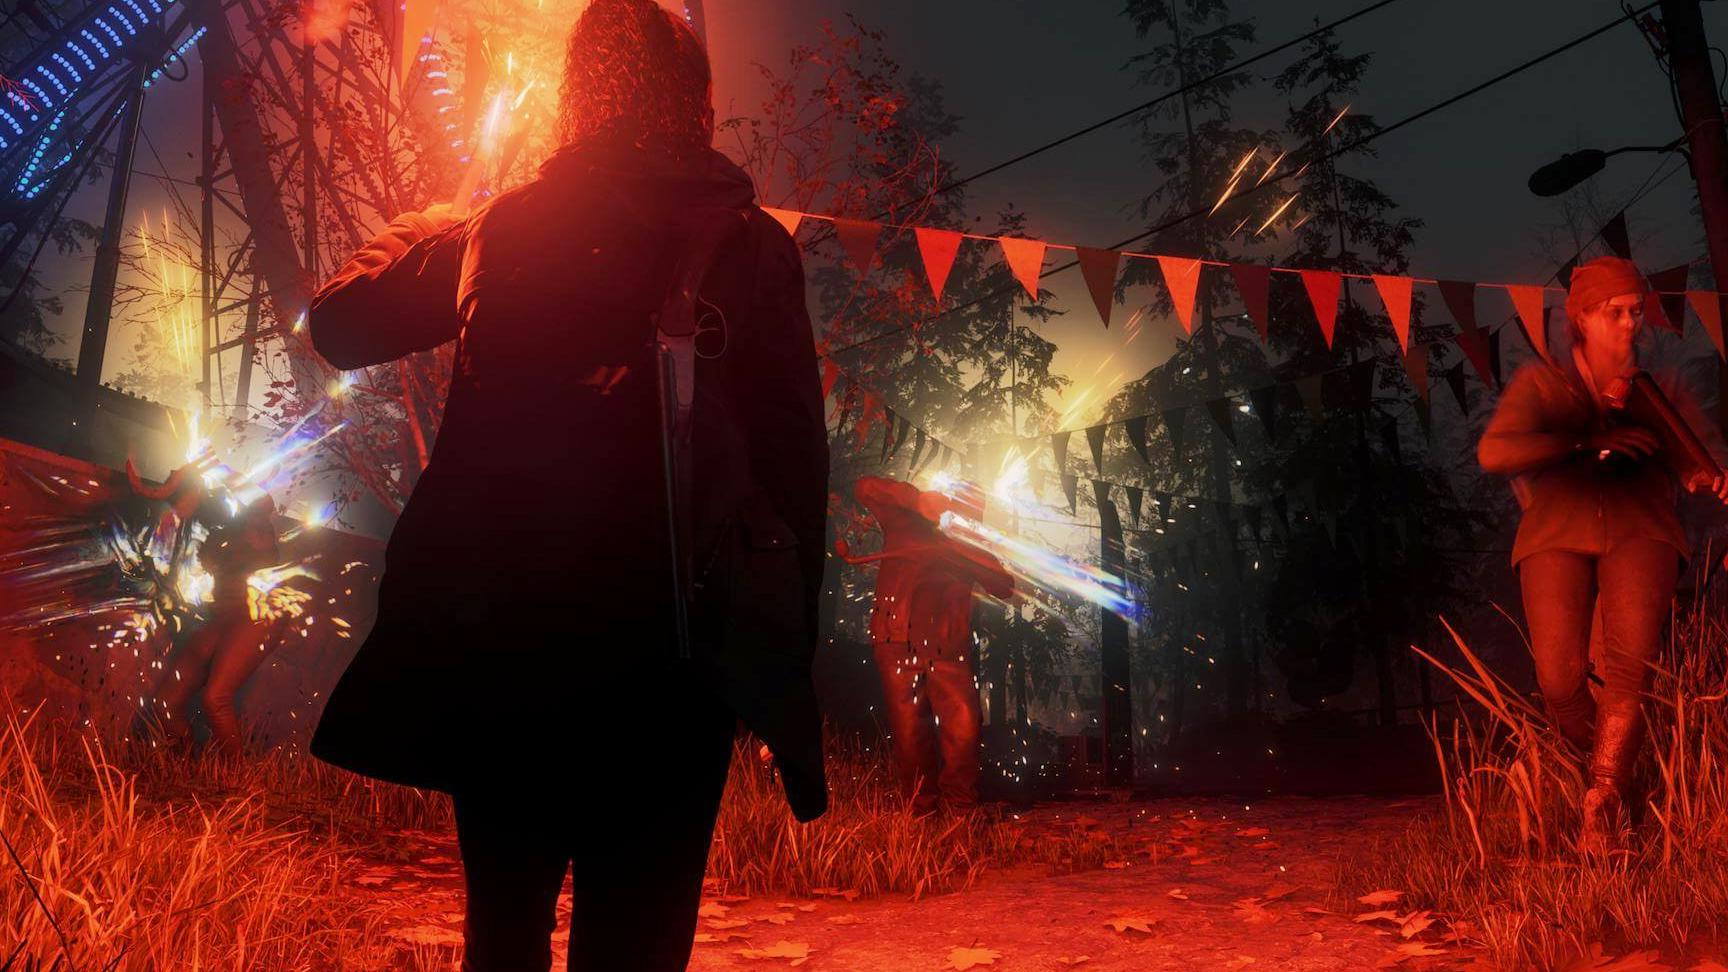 Alan Wake 2 was my big winner at the PlayStation Showcase – here's